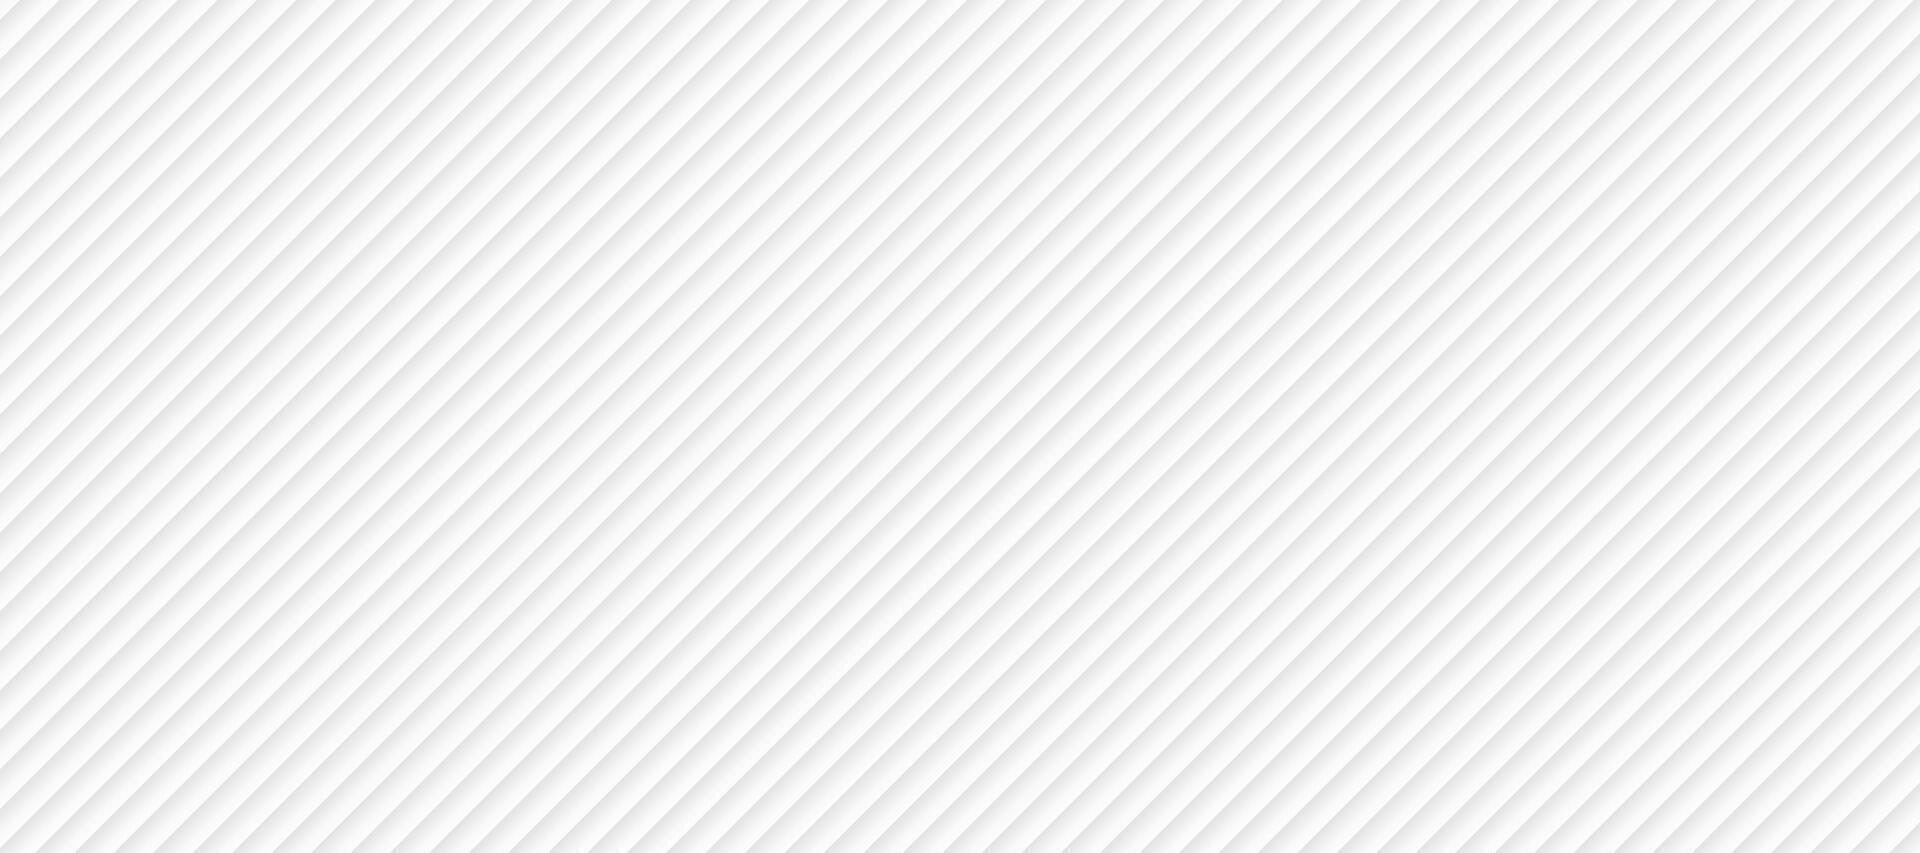 Grey white abstract modern background with diagonal lines vector